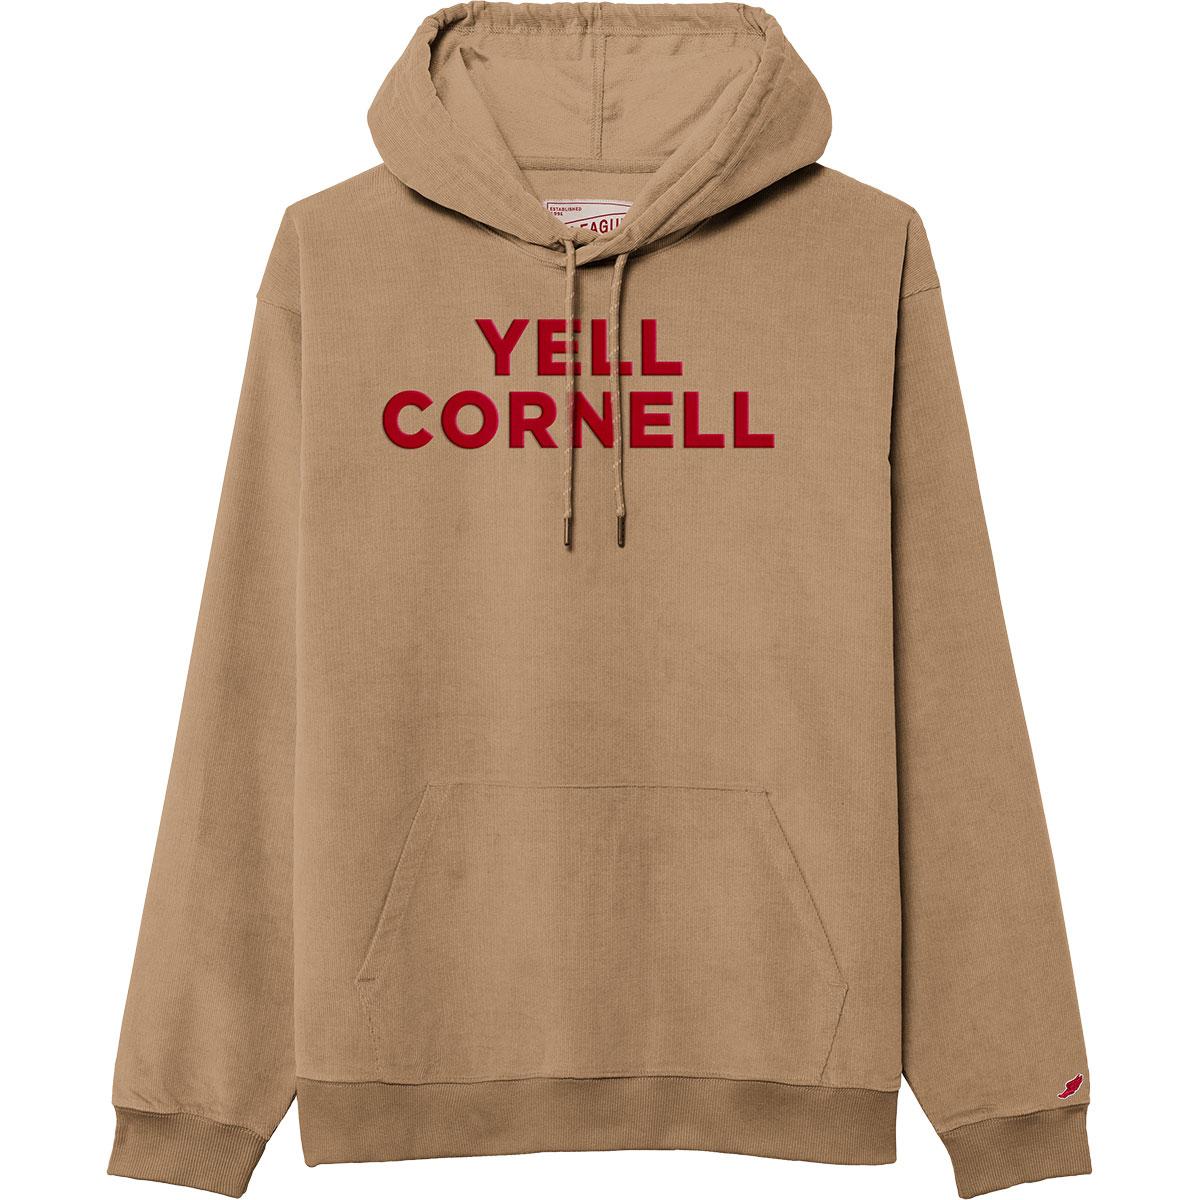 League Yell Cornell Over C Emb Cord